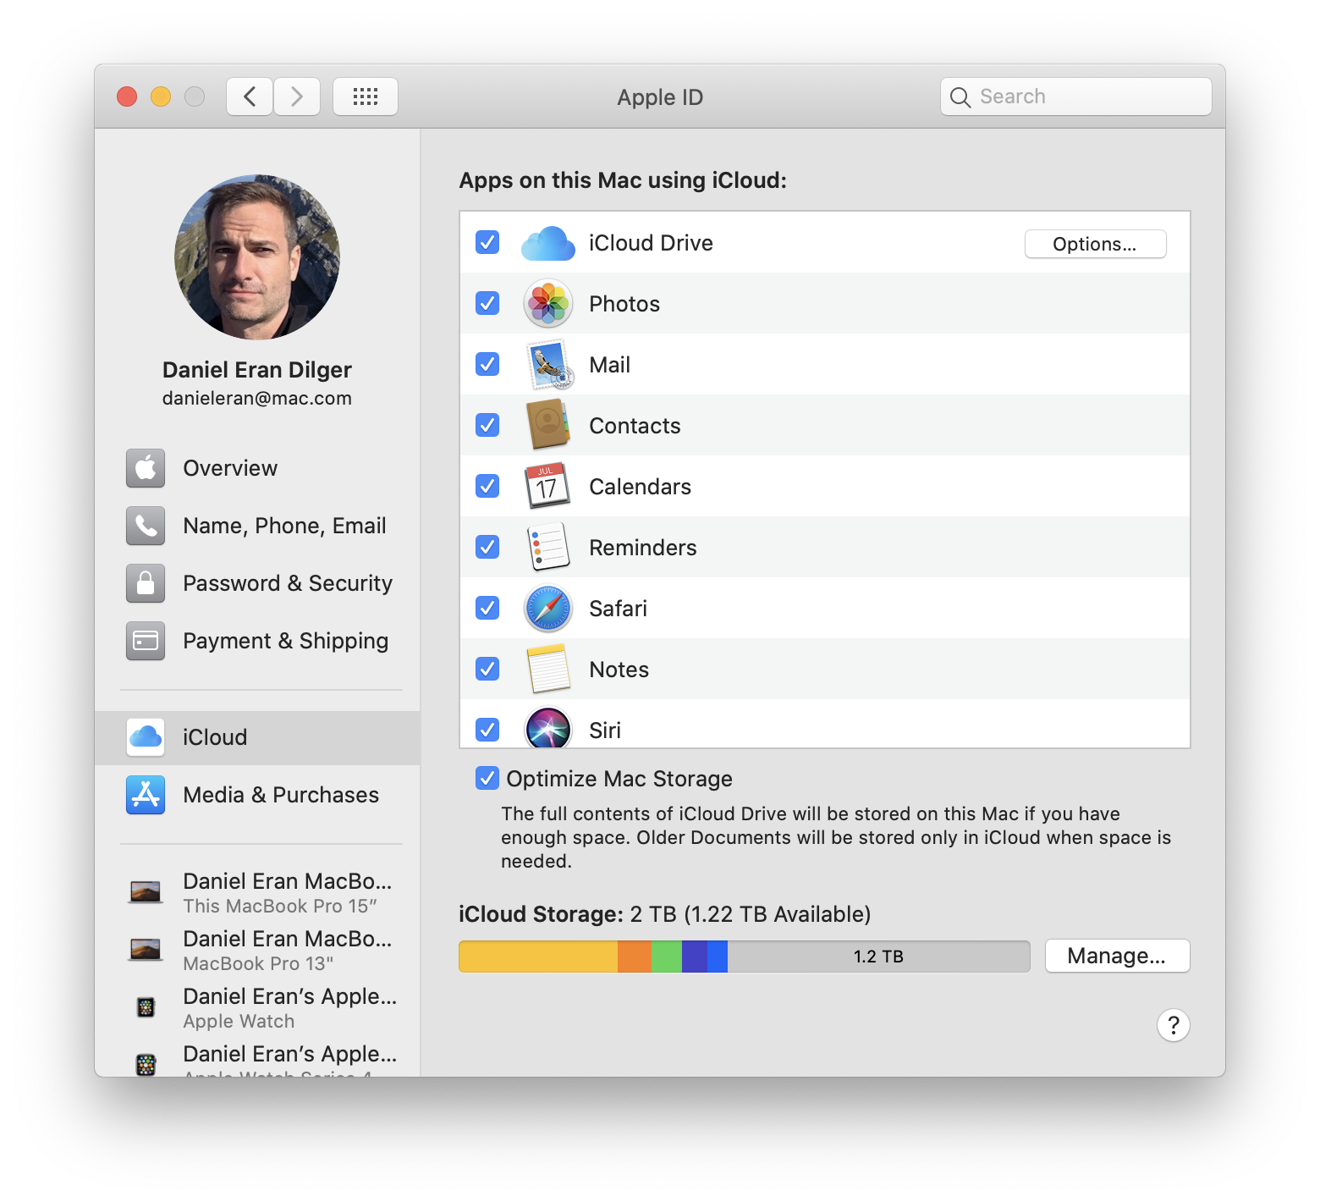 Network Recording Player Application For Mac